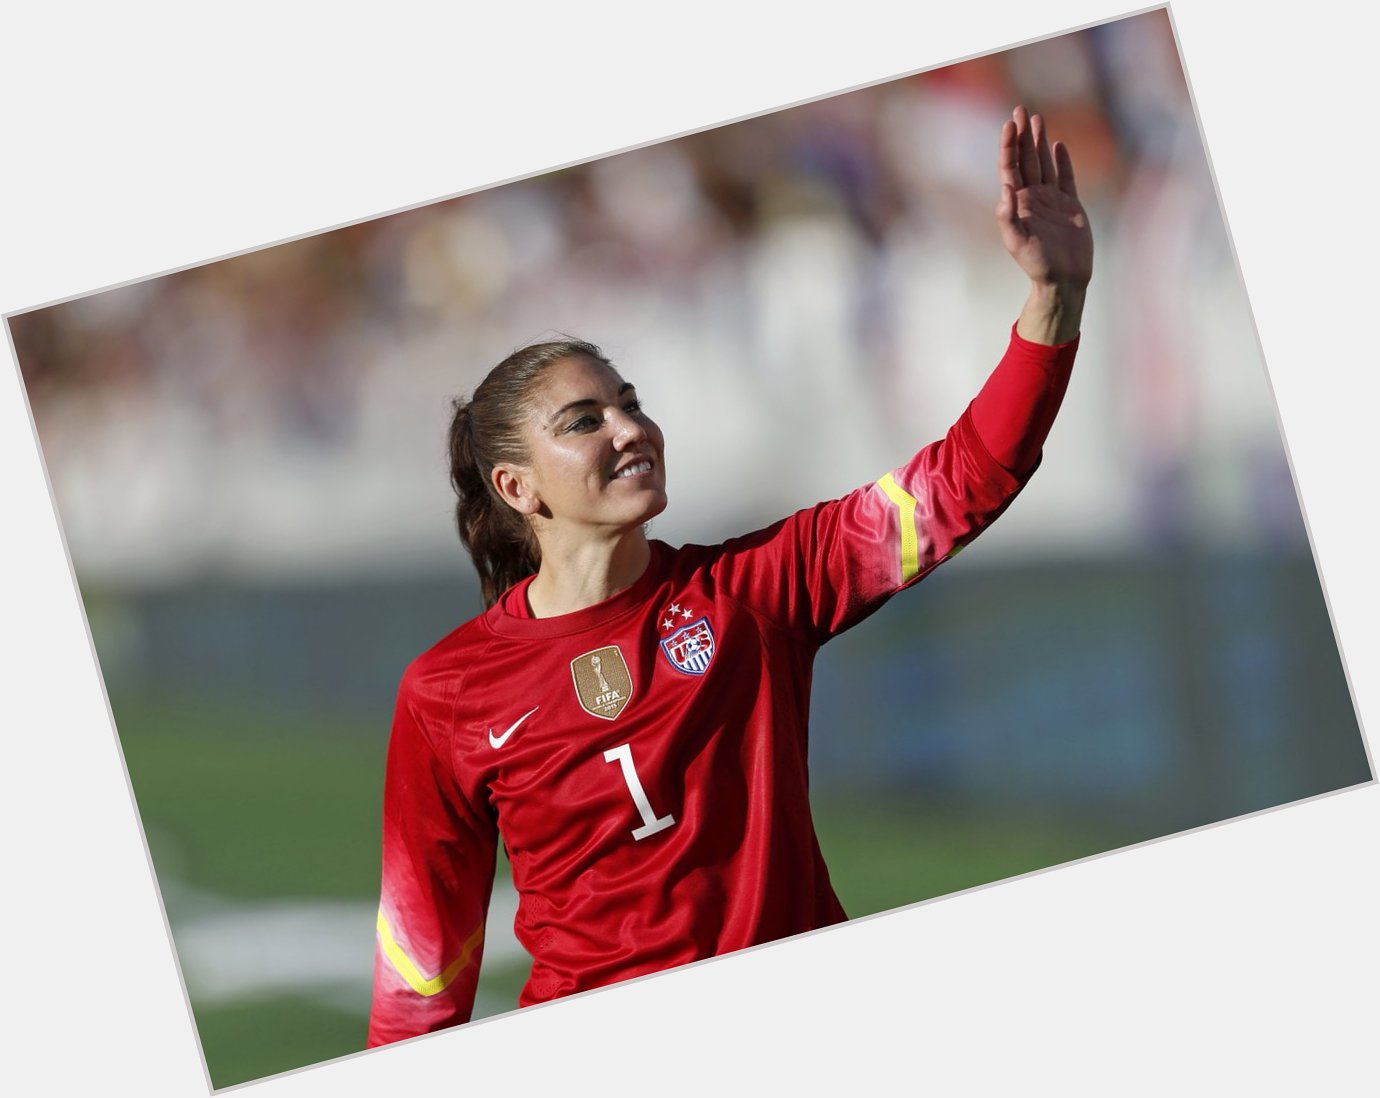  Two-time Olympic champion World Cup winner 2015 FIFA FIFPro World XI 2015 & 2016

Happy birthday, Hope Solo 